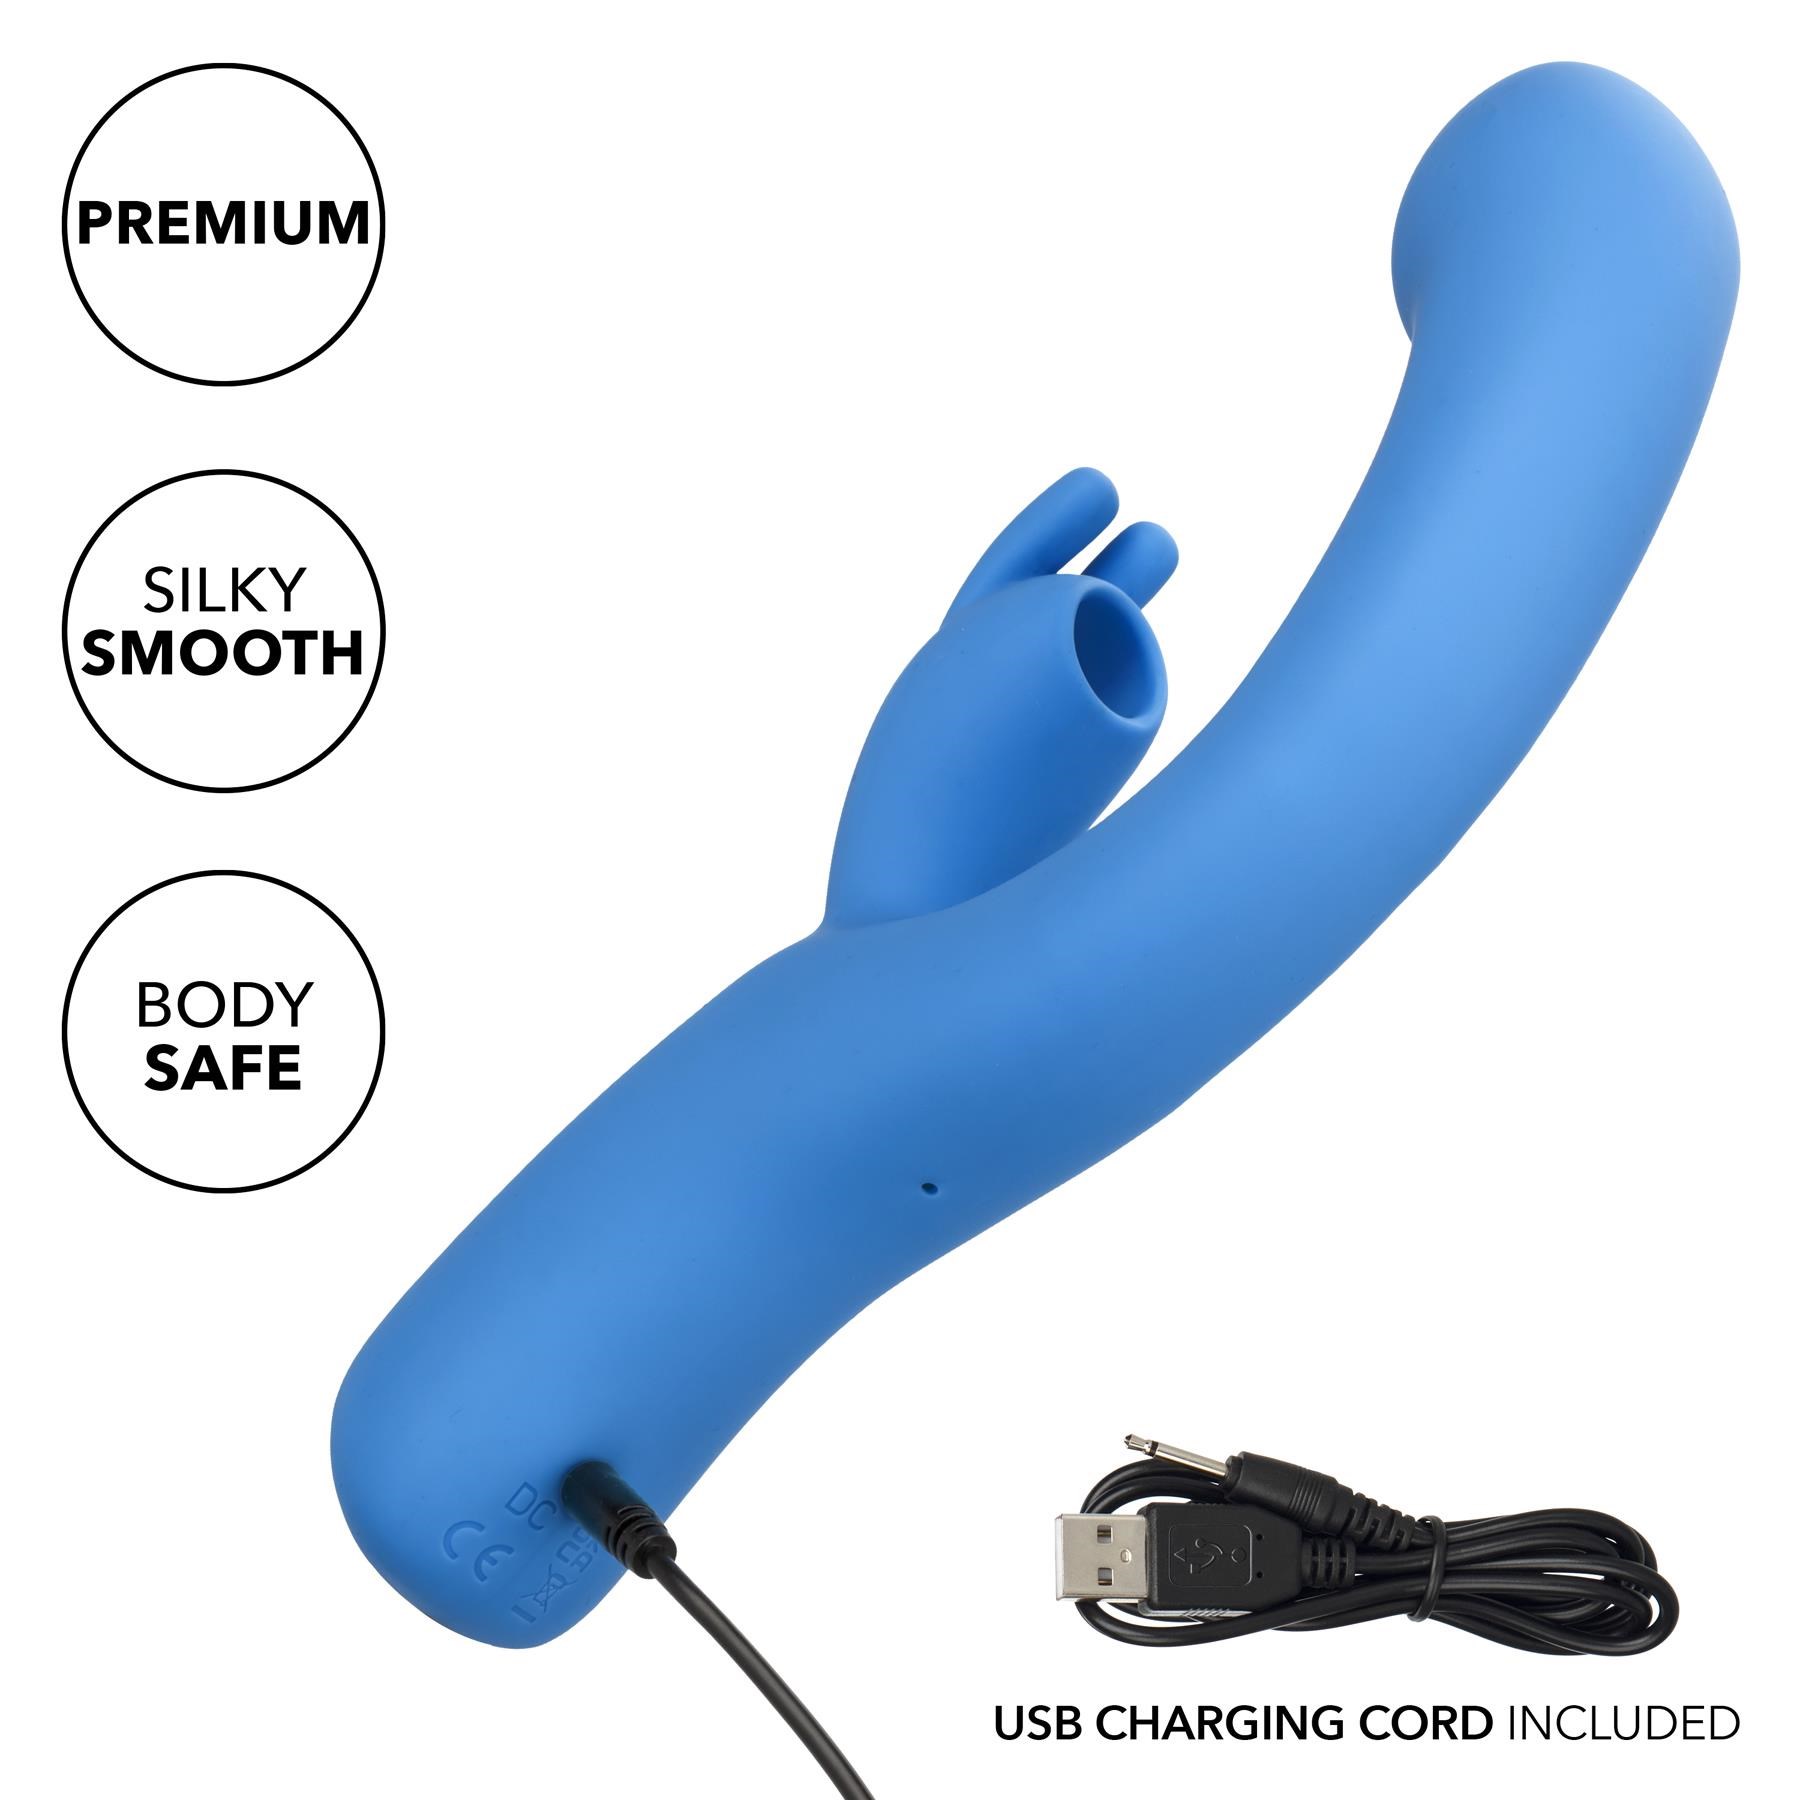 Jack Rabbit Elite Suction Rabbit- Showing Where Charging Cable is Placed